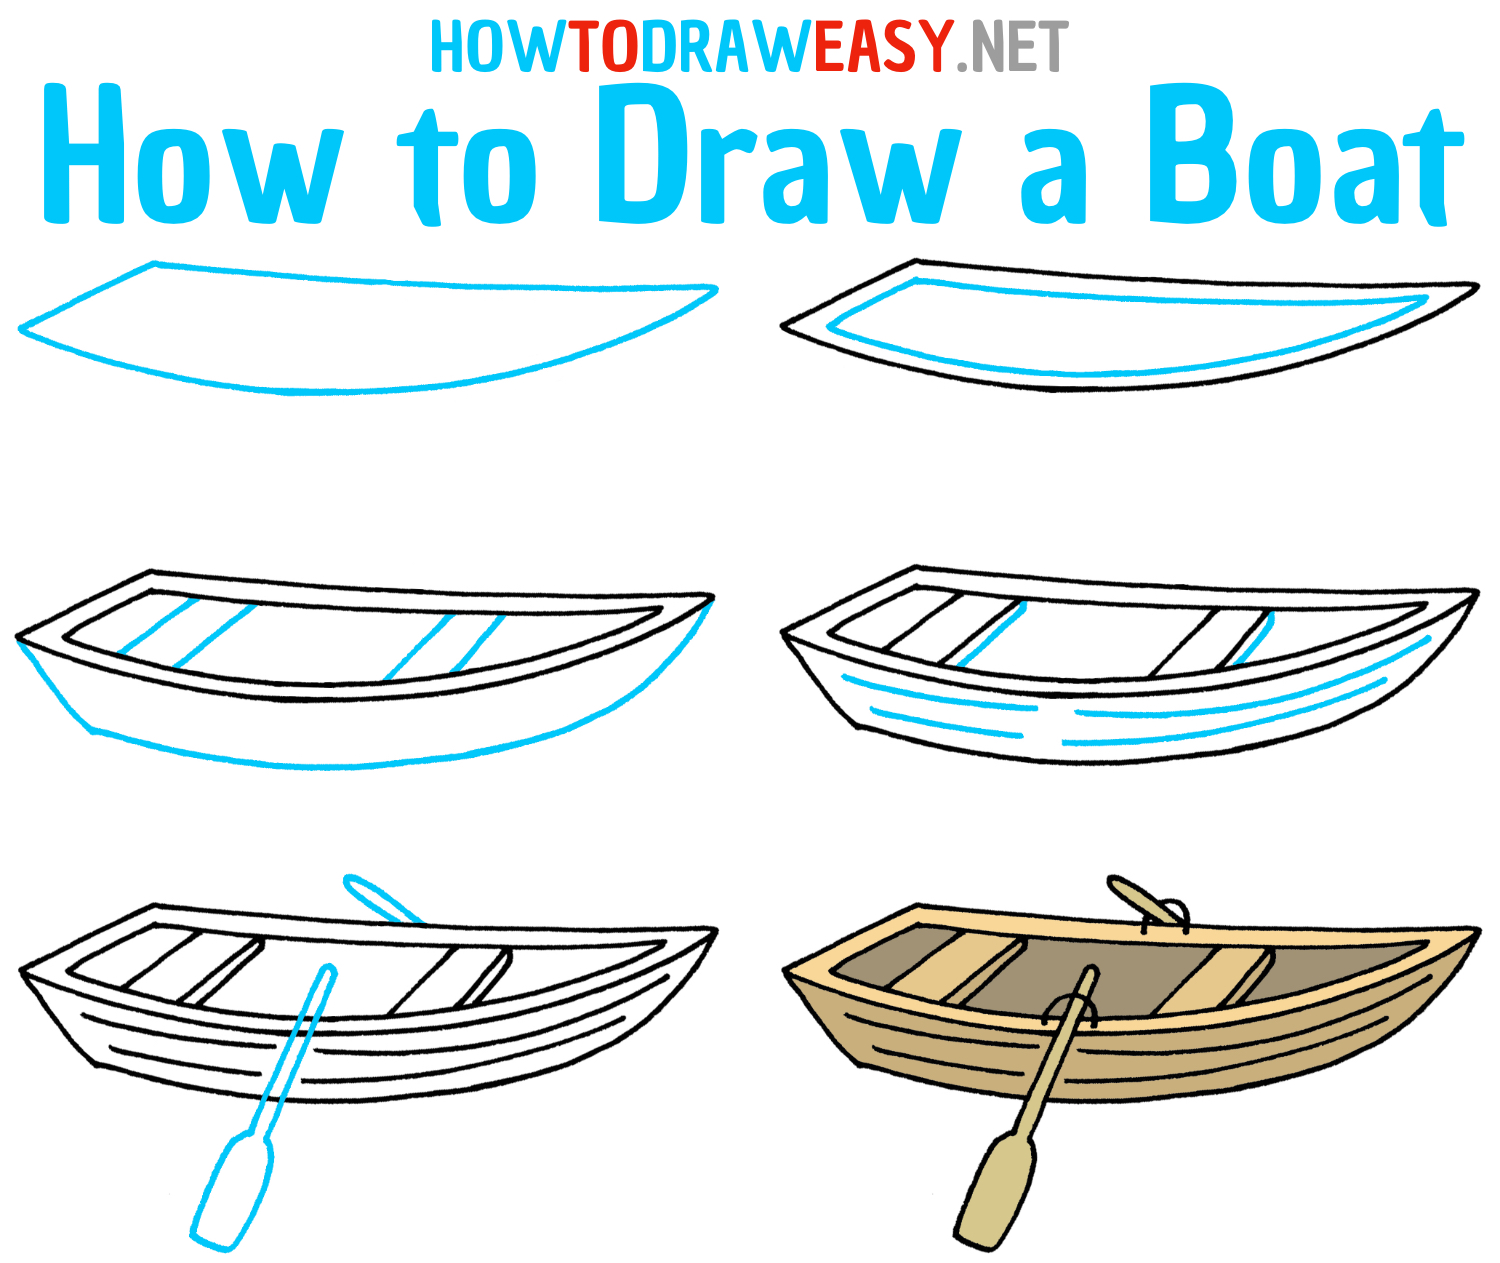 How to Draw a Boat Step by Step